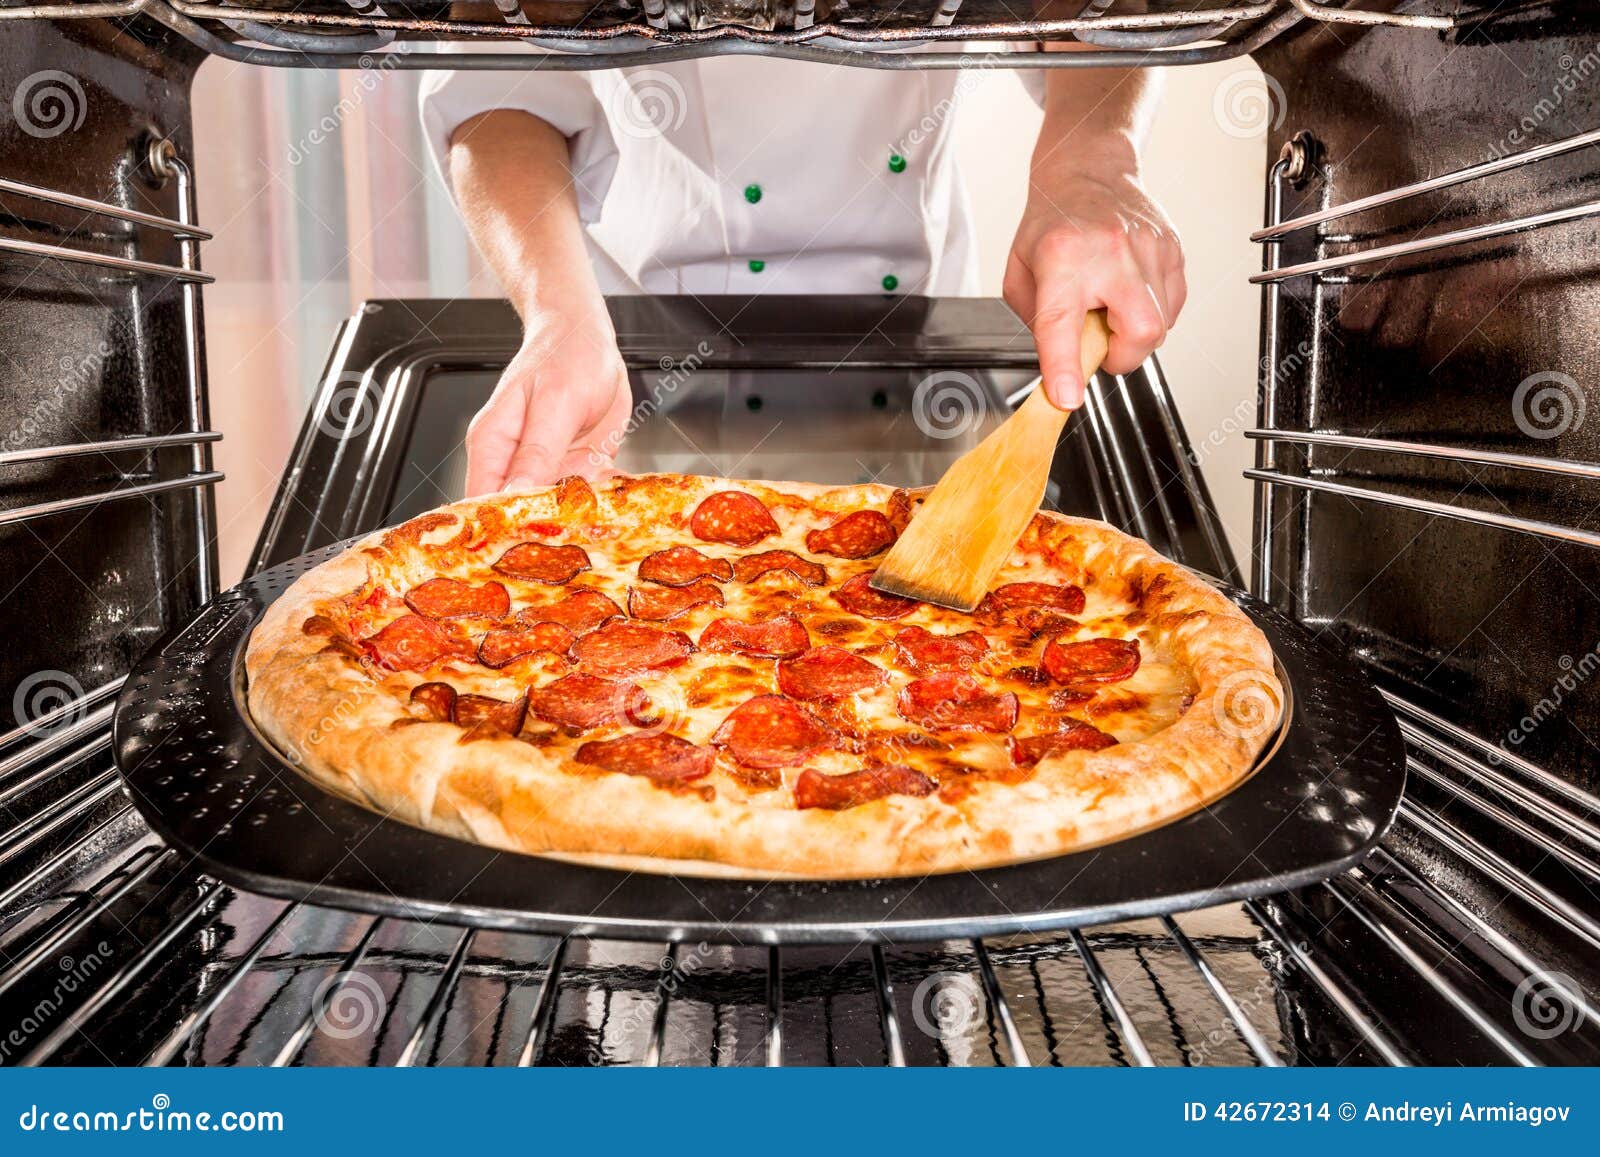 How to cook a pizza in an oven